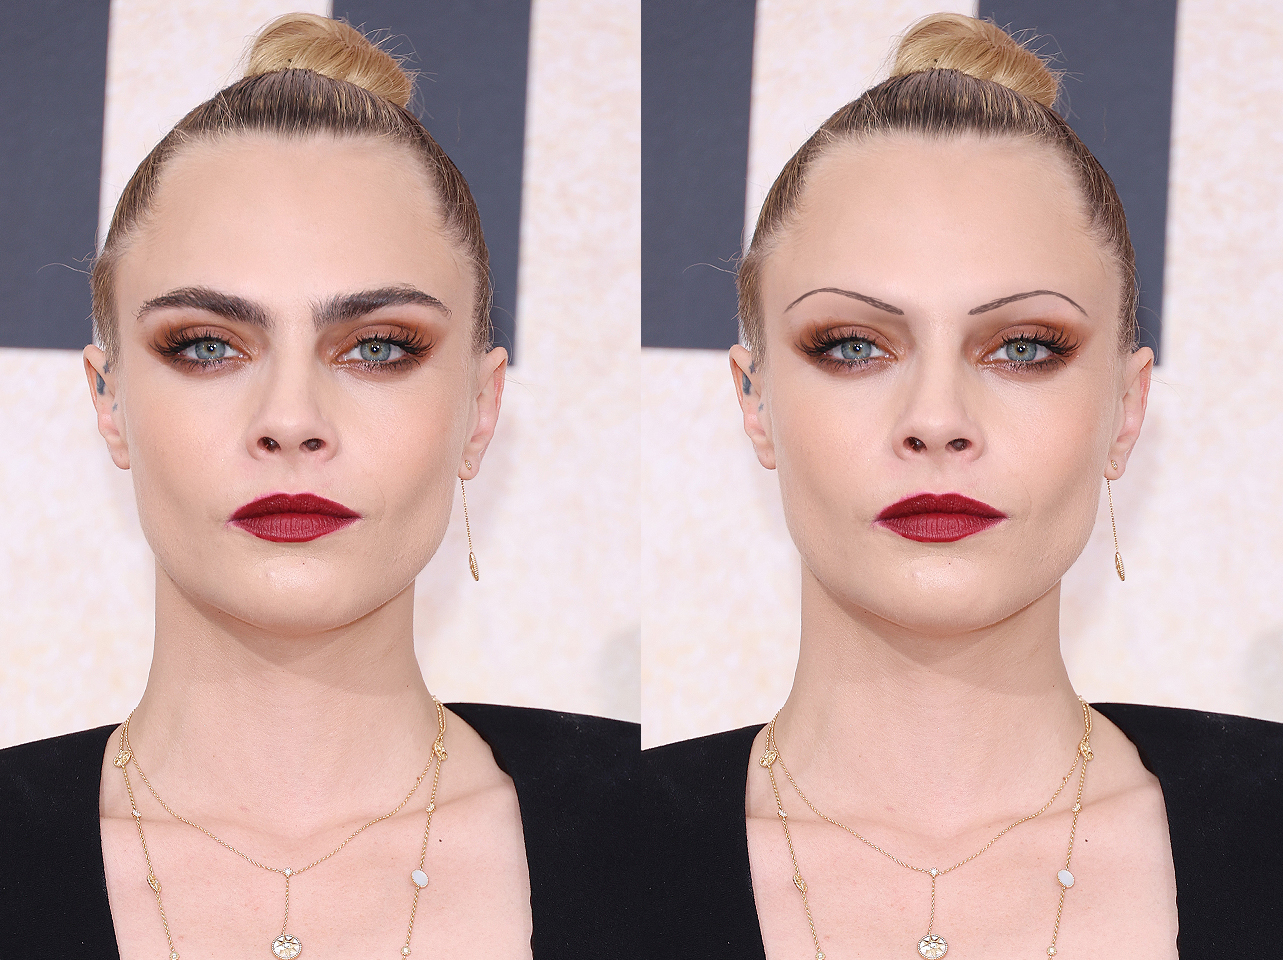 Cara Delevingne's signature brows from 2022 vs a digitally edited thin-brow look | Source: Getty Images